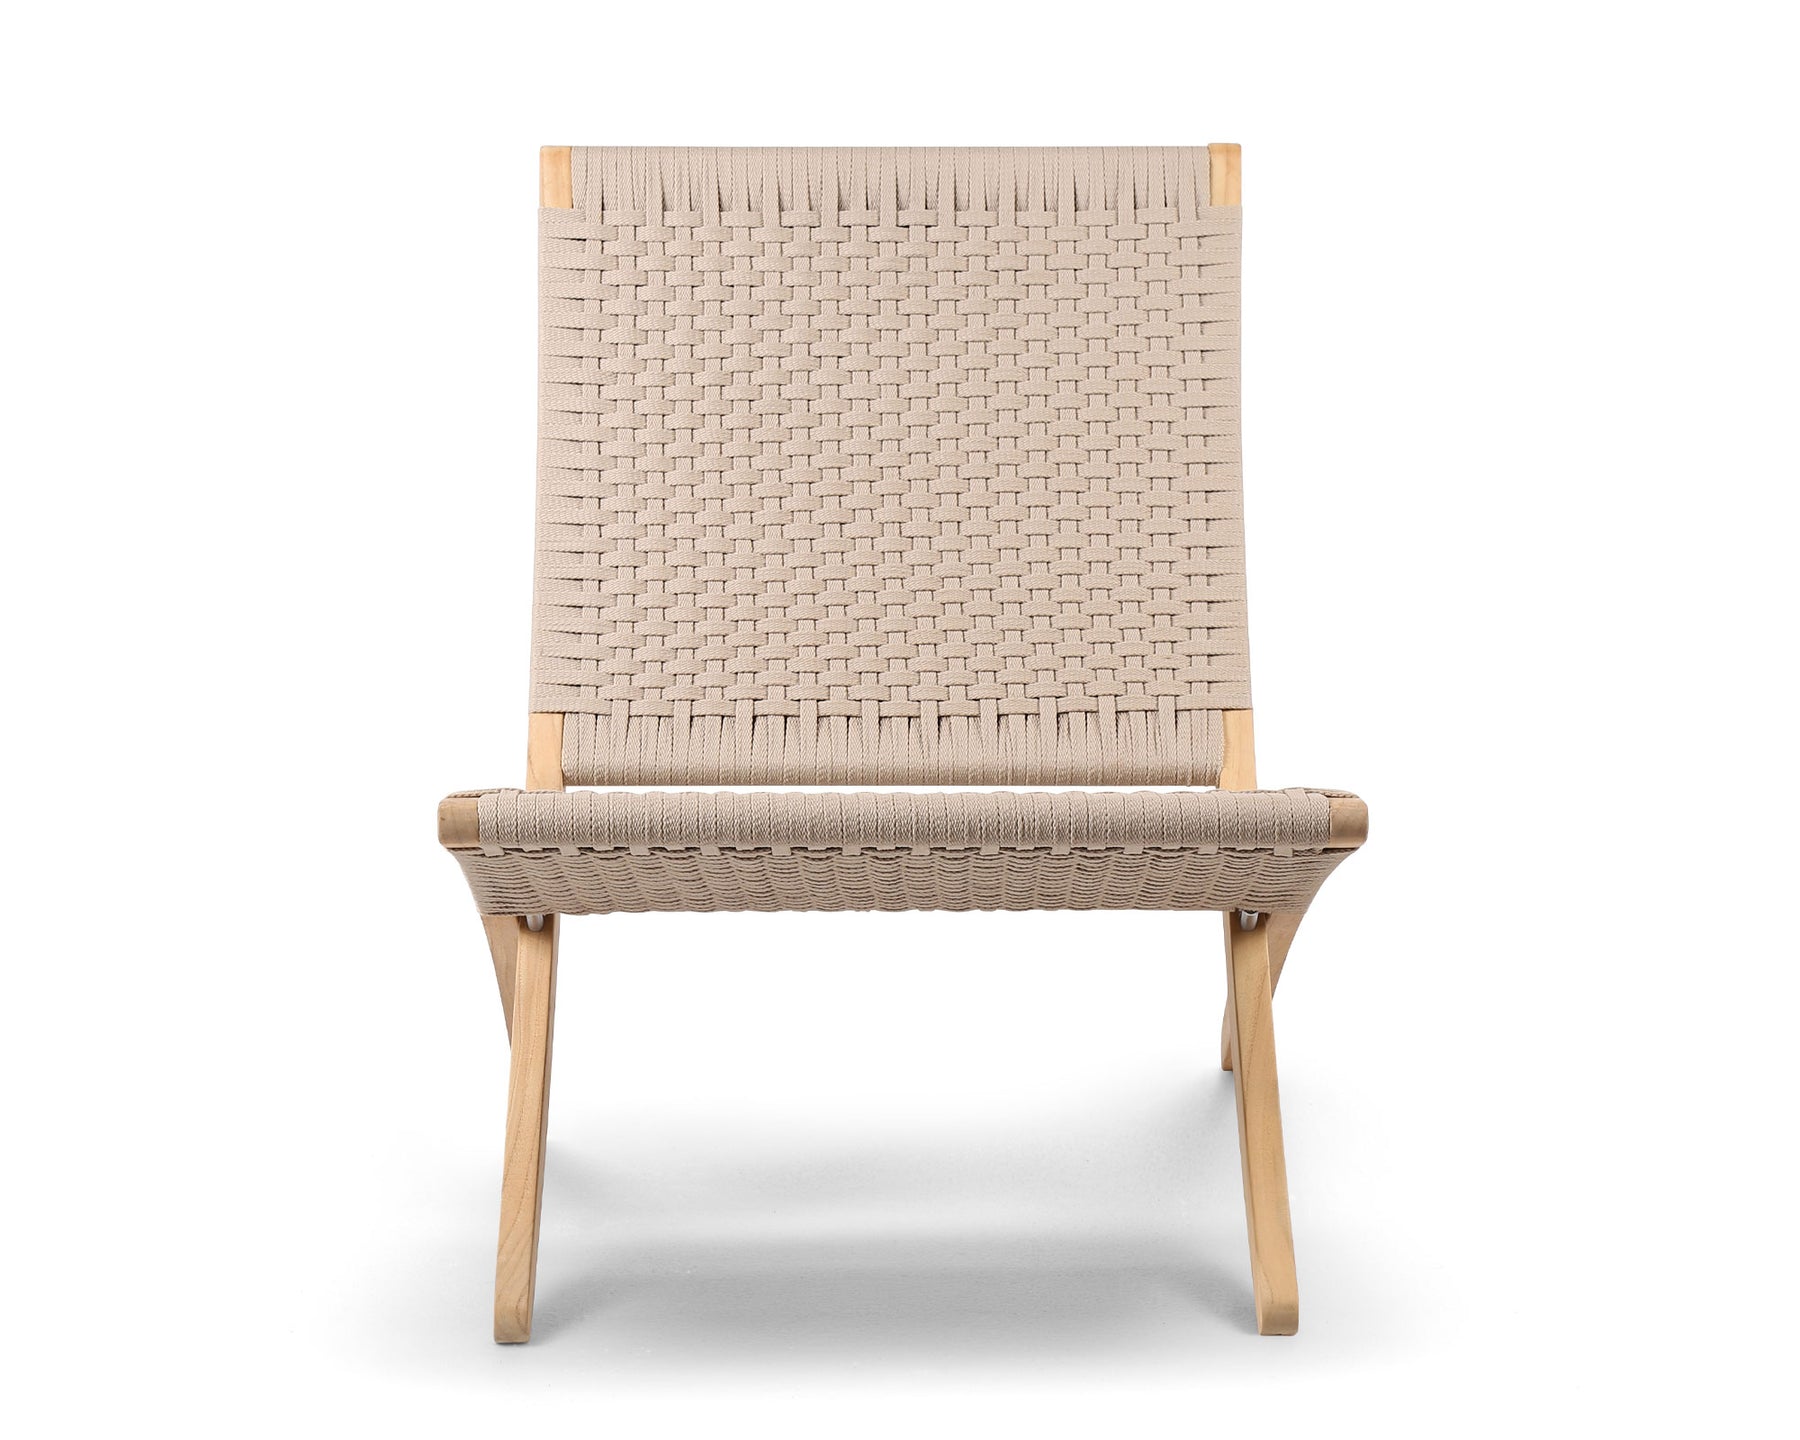 Rope & Wood Outdoor Chair | DSHOP